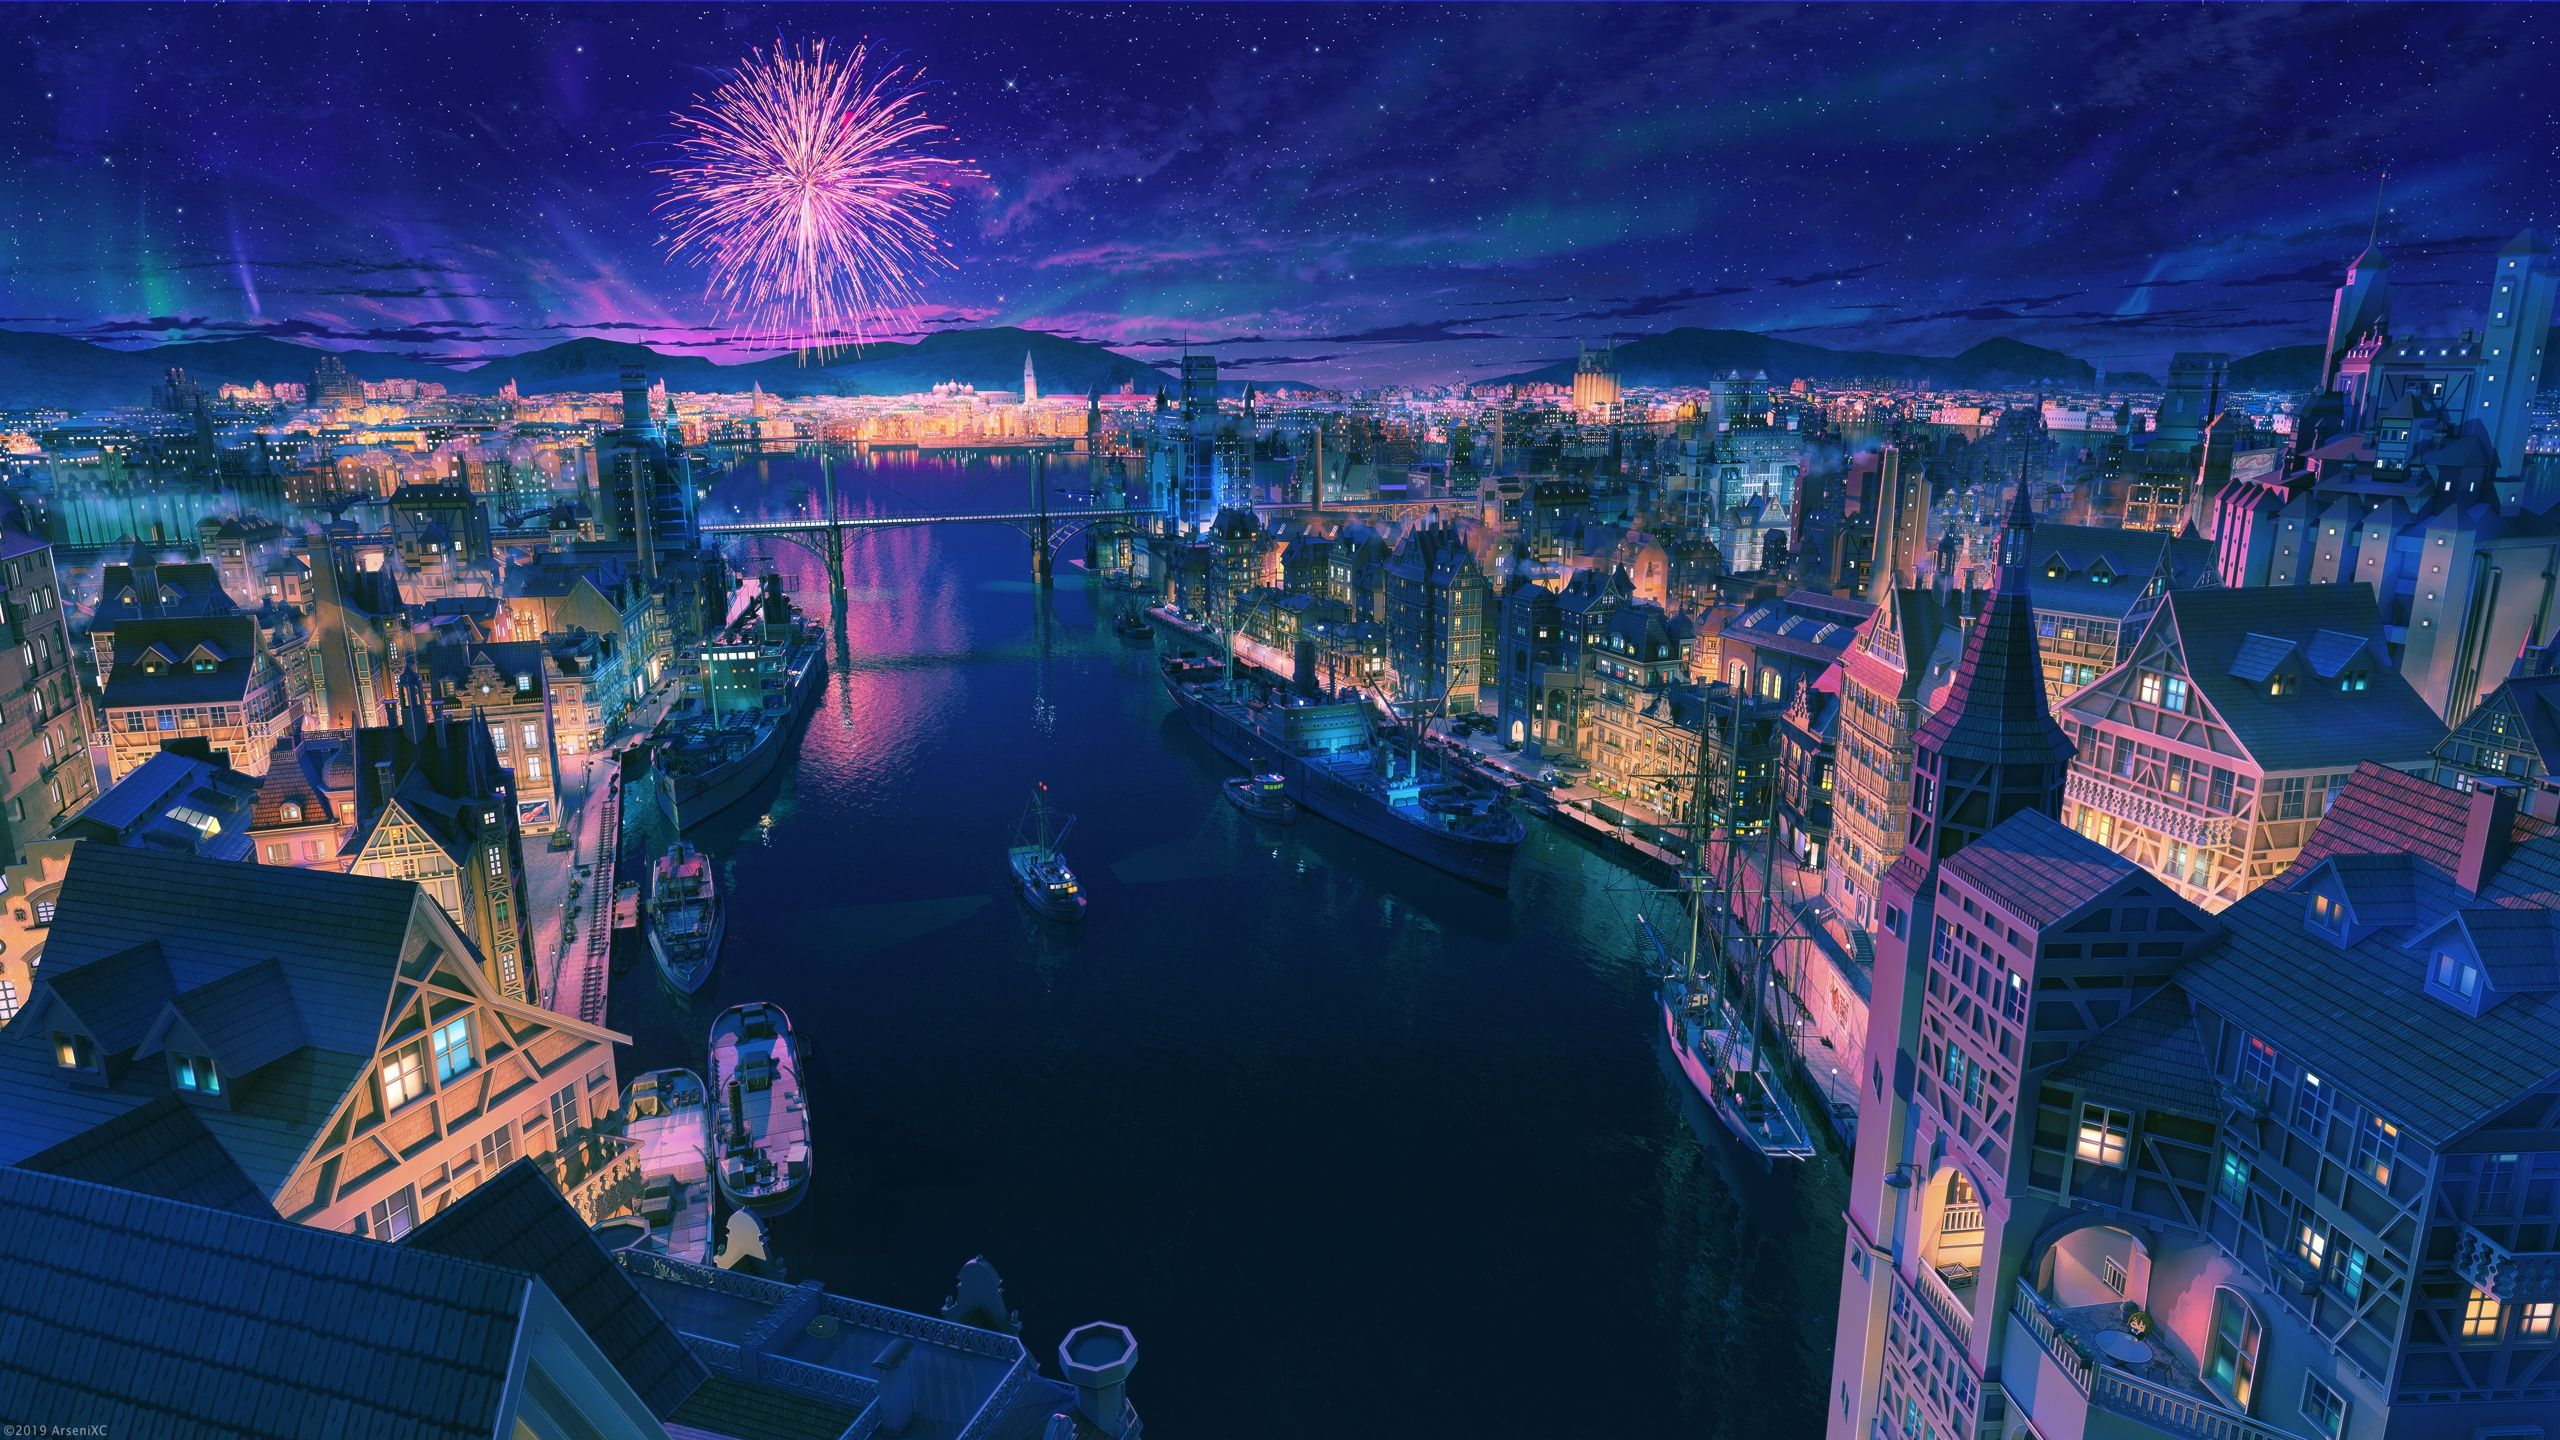 Download 2560x1440 Anime Cityscape, Night, Fireworks, Scenic